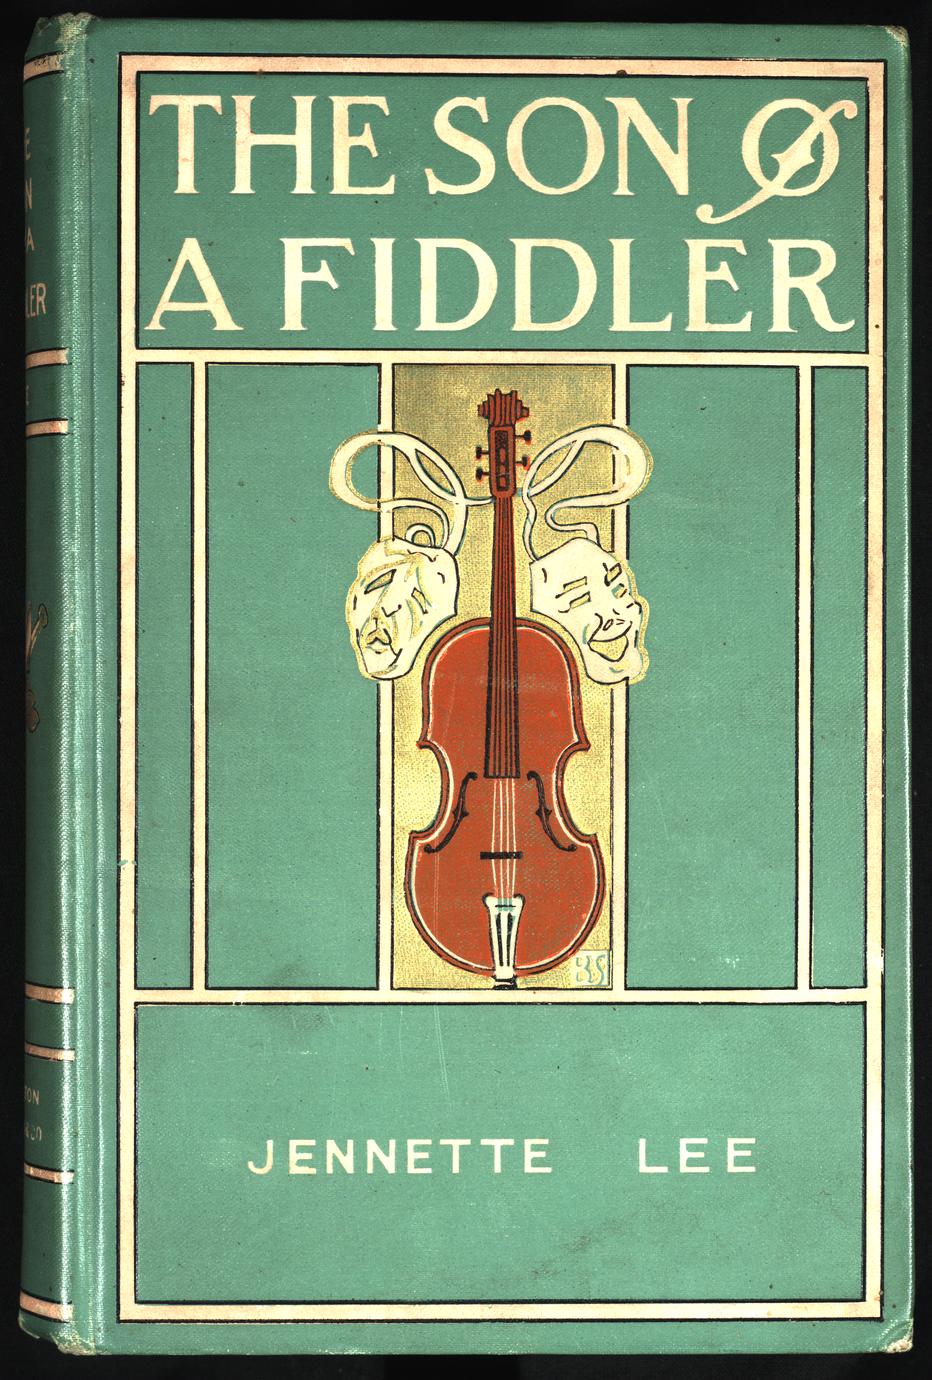 The son of a fiddler (1 of 3)